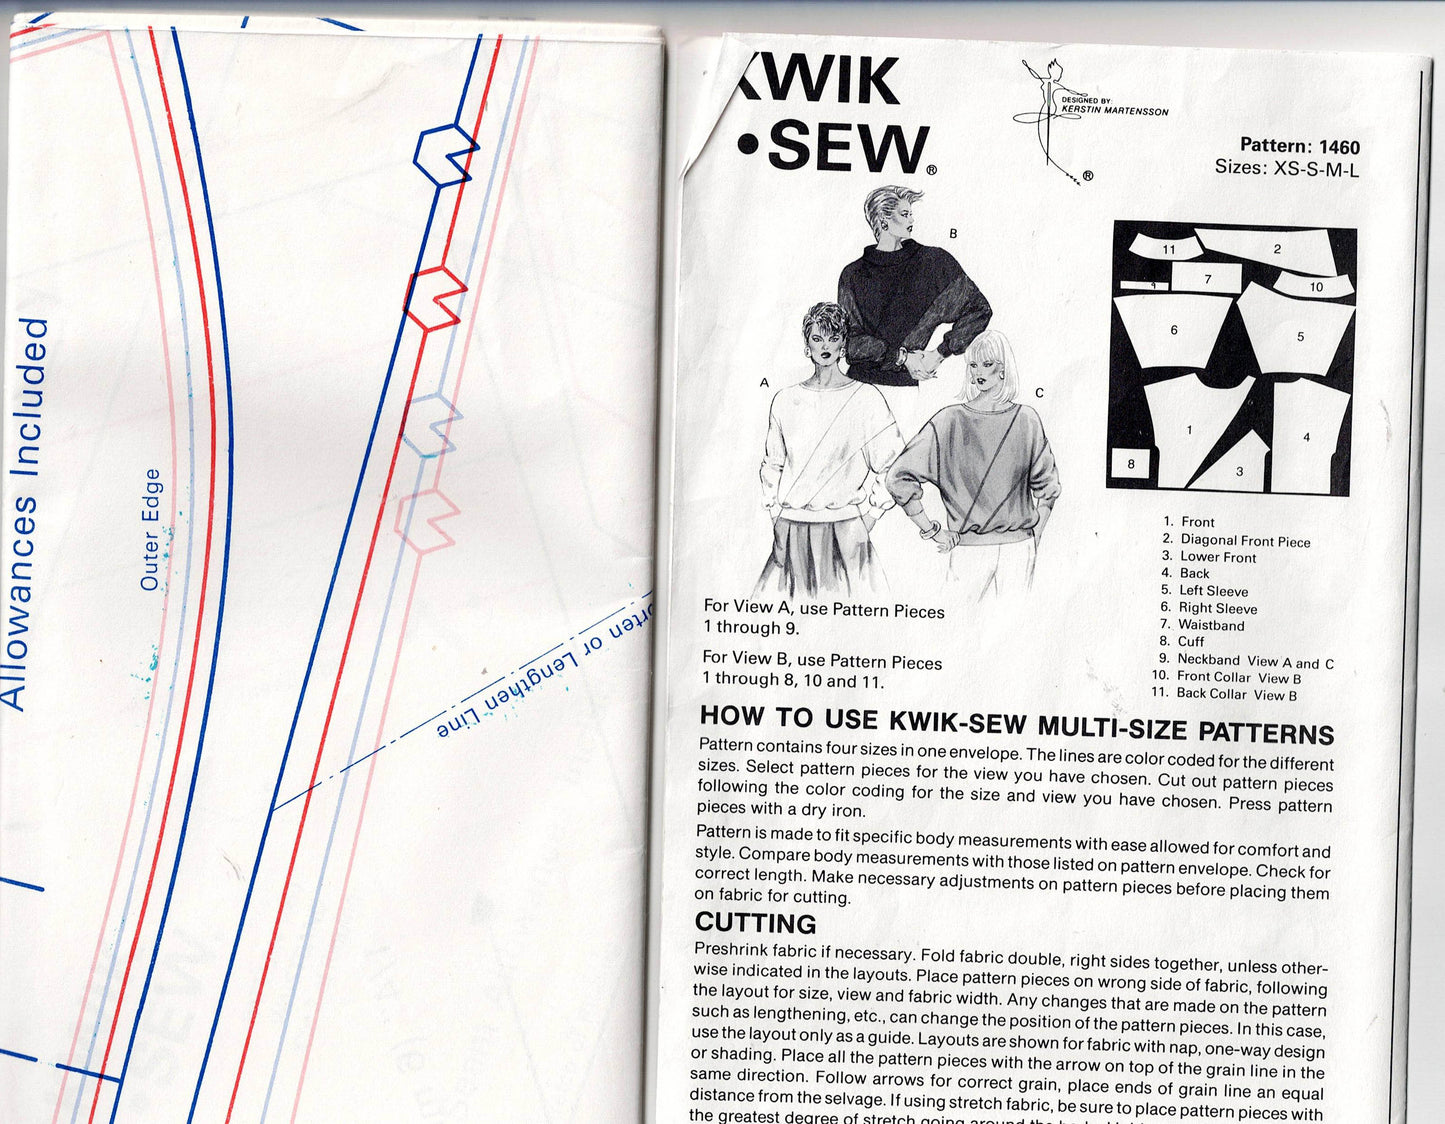 Kwik Sew 1460 Womens Color Block Dolman Sleeved Stretch Tops 1980s Vintage Sewing Pattern Size XS - L UNCUT Factory Folded